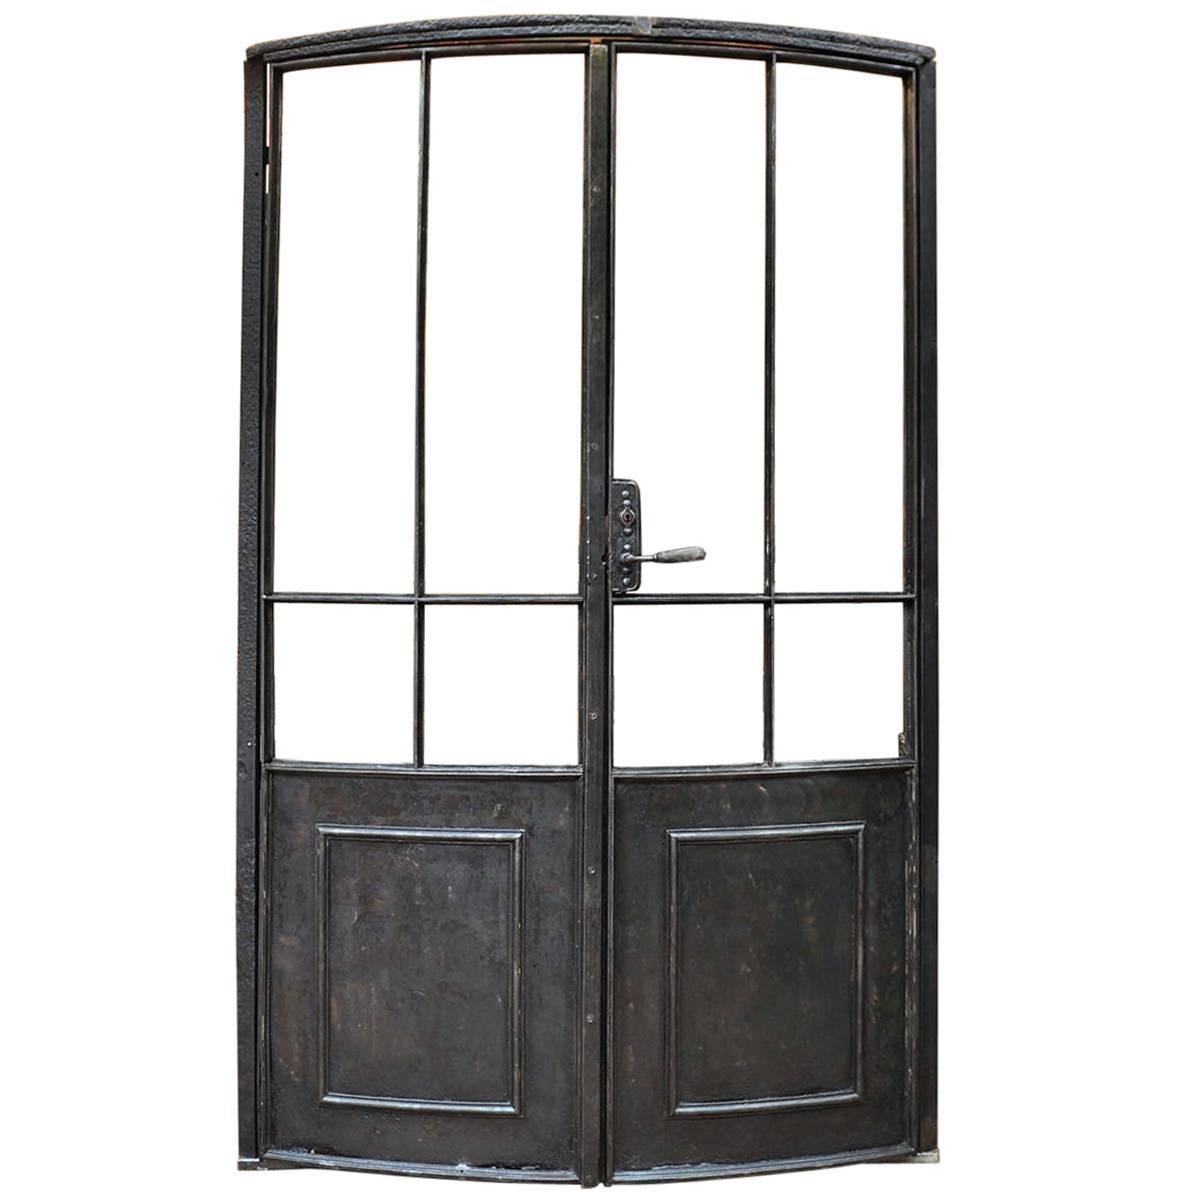 19th Century Curved Iron Double Doors